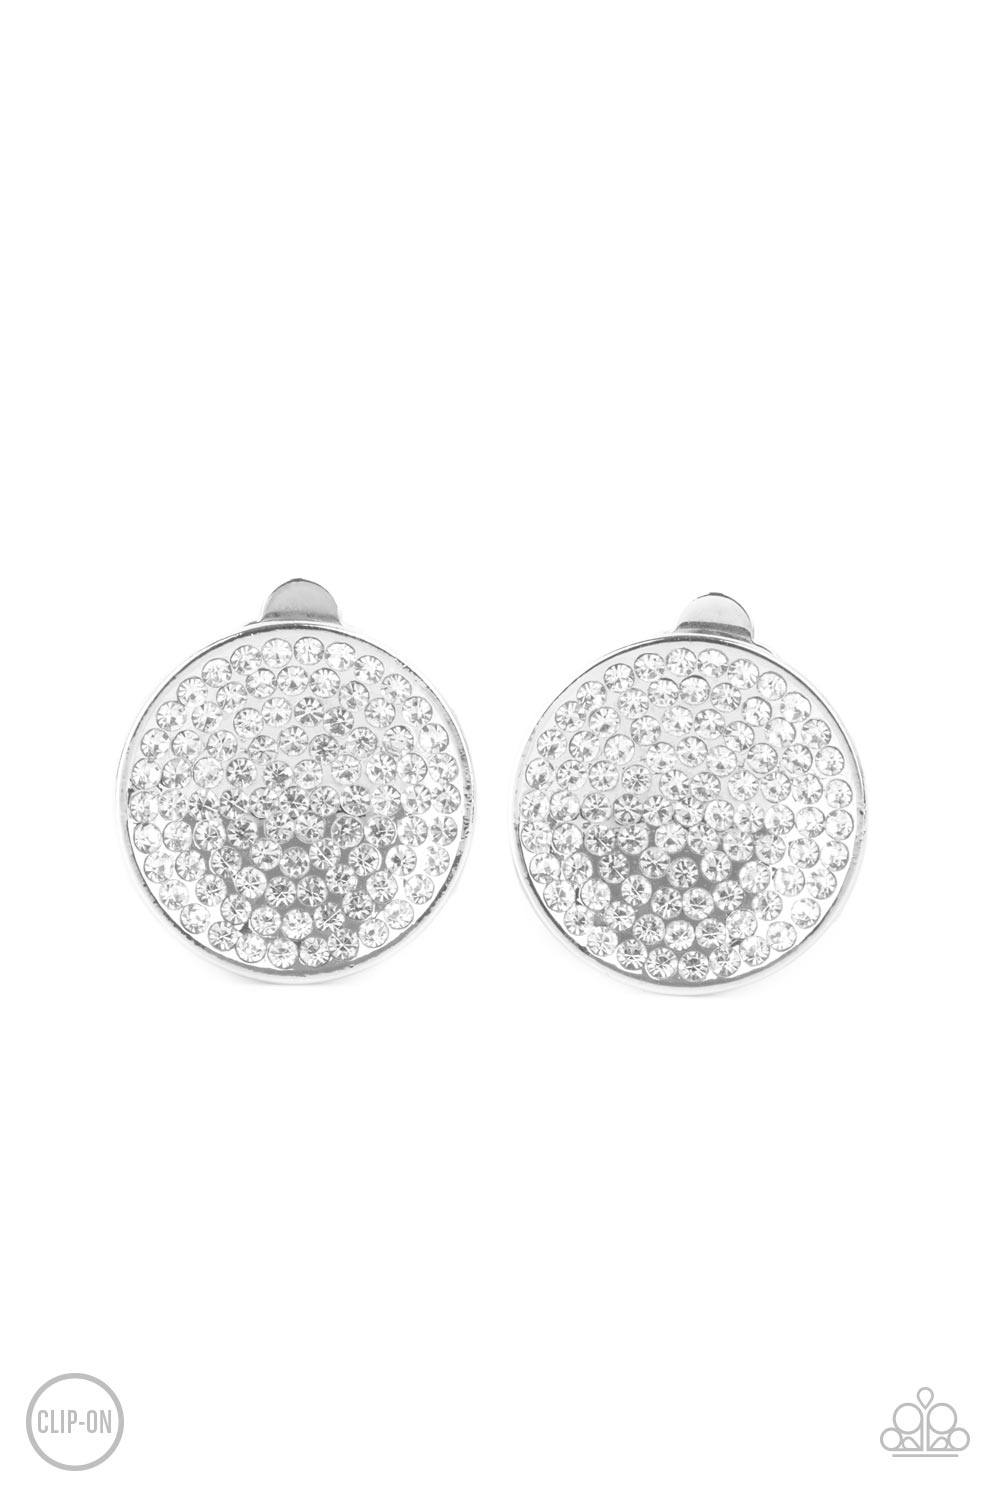 Drama on Demand White Clip-On Earring - Paparazzi Accessories  Sparkling with brilliance, a concave shiny silver disc encompasses radiating rows of shimmering white rhinestones creating a striking impact. Earring attaches to a standard clip-on fitting.  Sold as one pair of clip-on earrings.